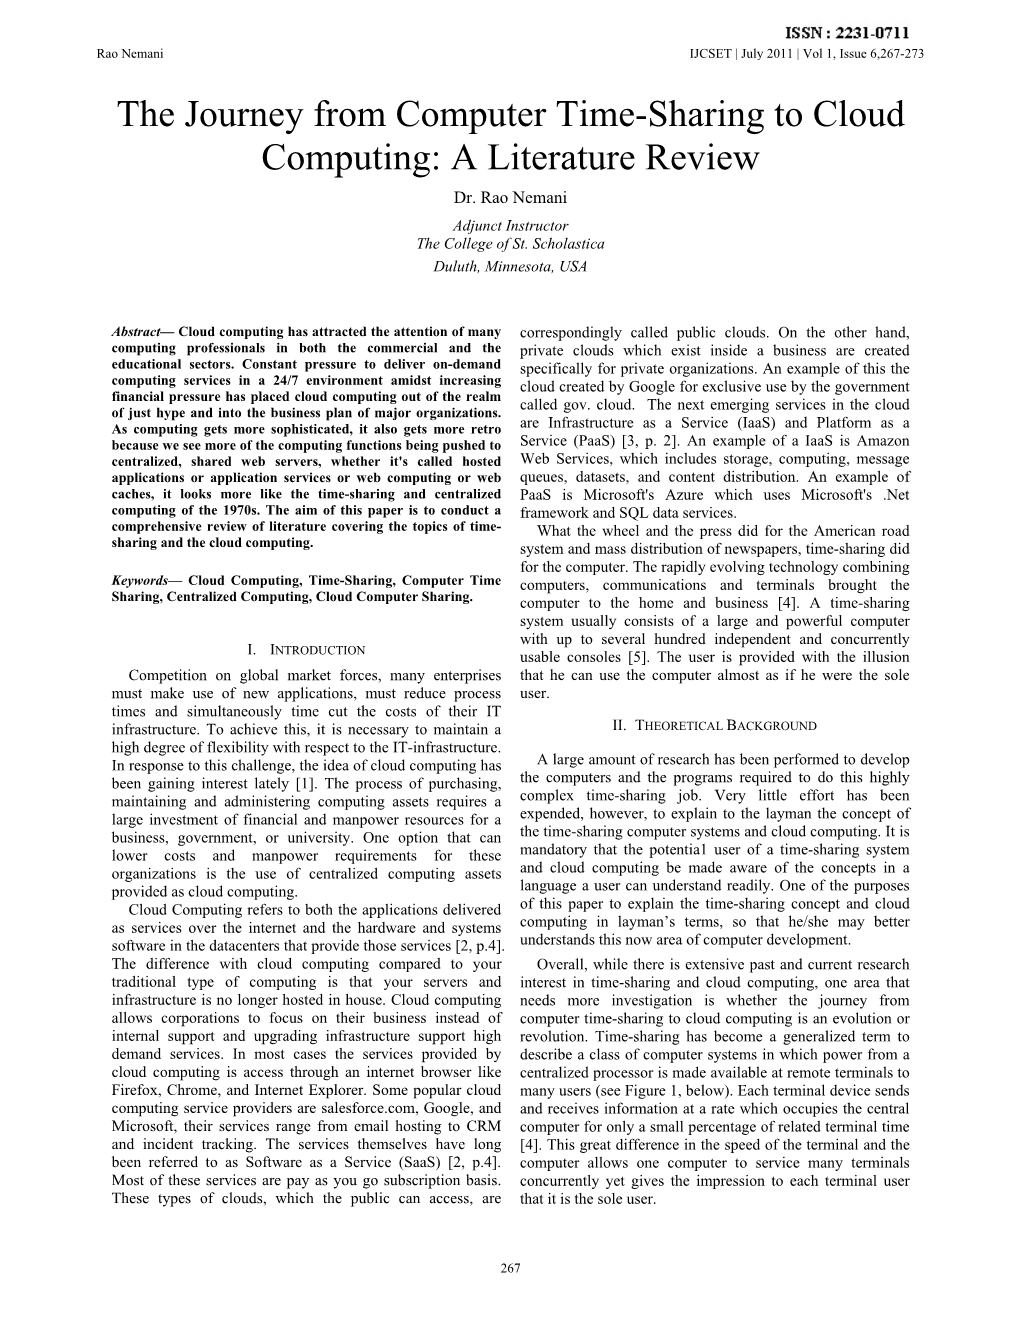 The Journey from Computer Time-Sharing to Cloud Computing: a Literature Review Dr